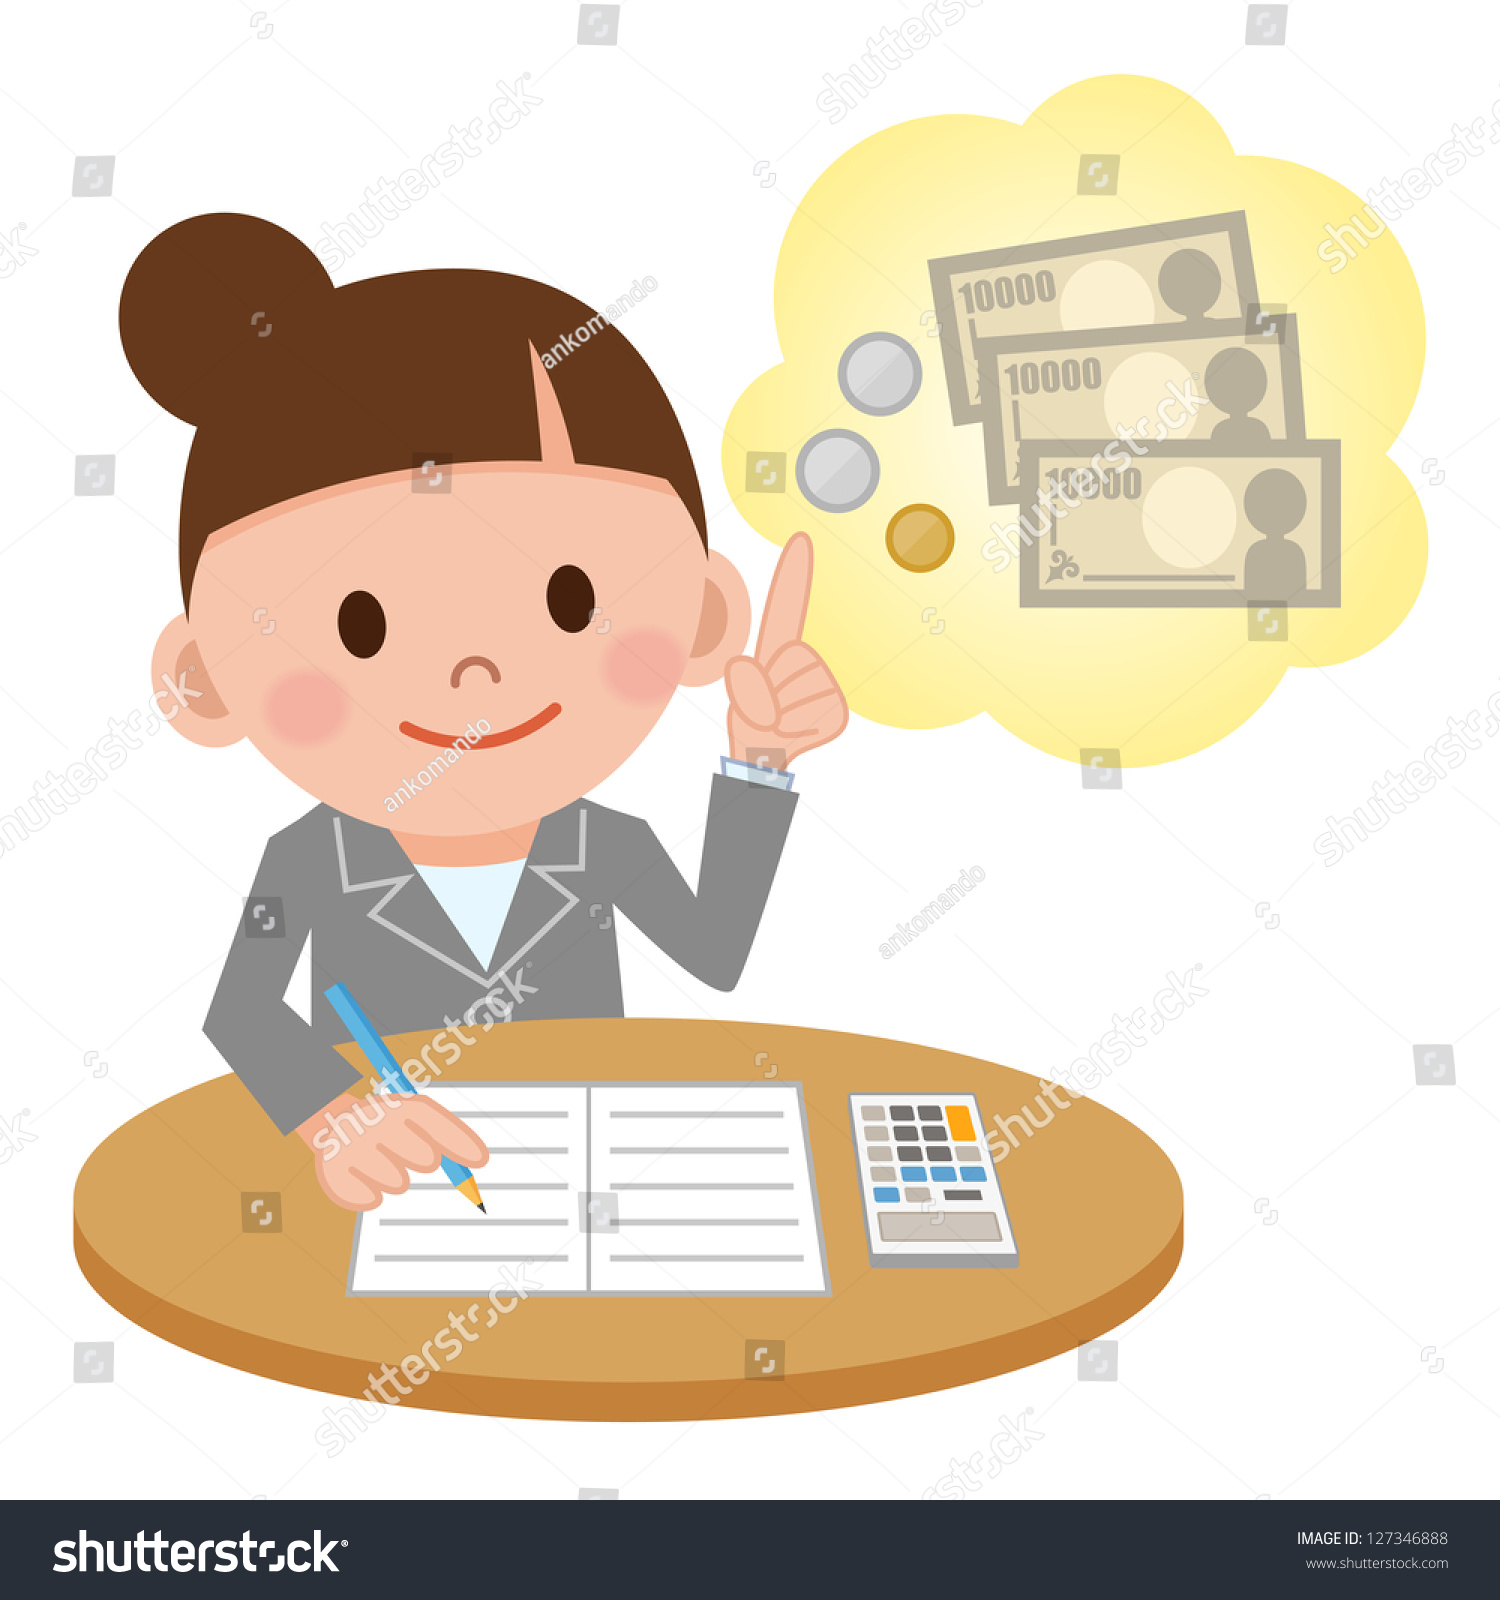 Accountant clipart accounting. Cilpart absolutely smart illustration